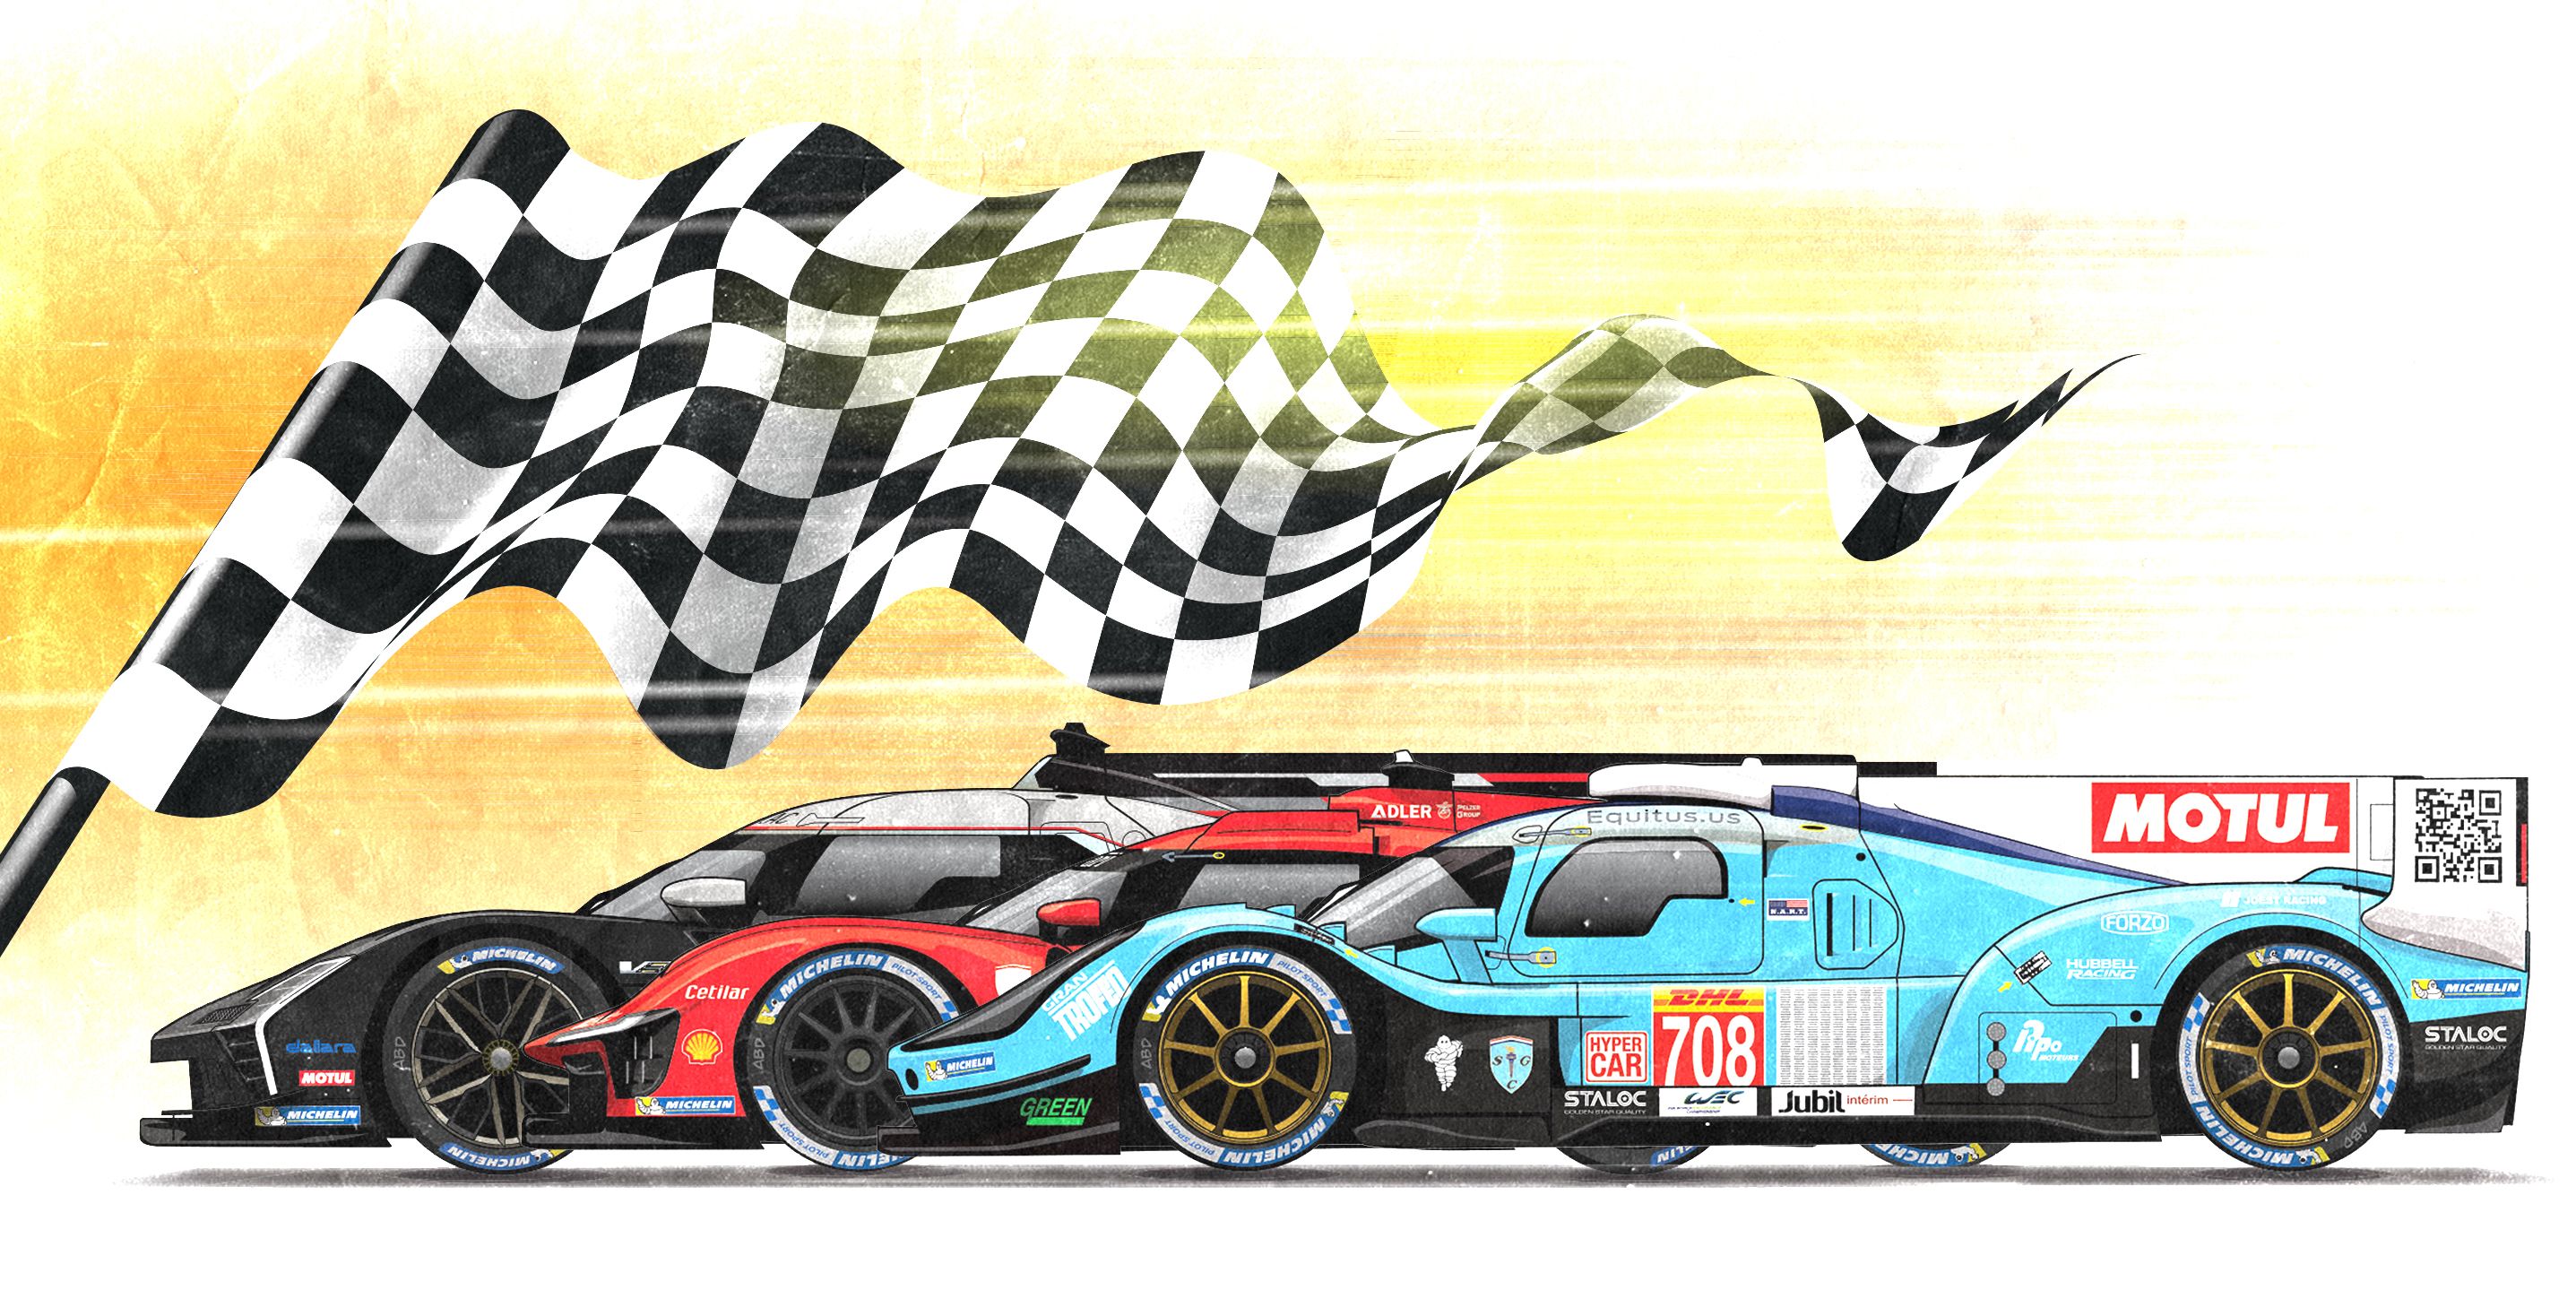 Here's Your Spotter's Guide for the Future of Prototype Racing